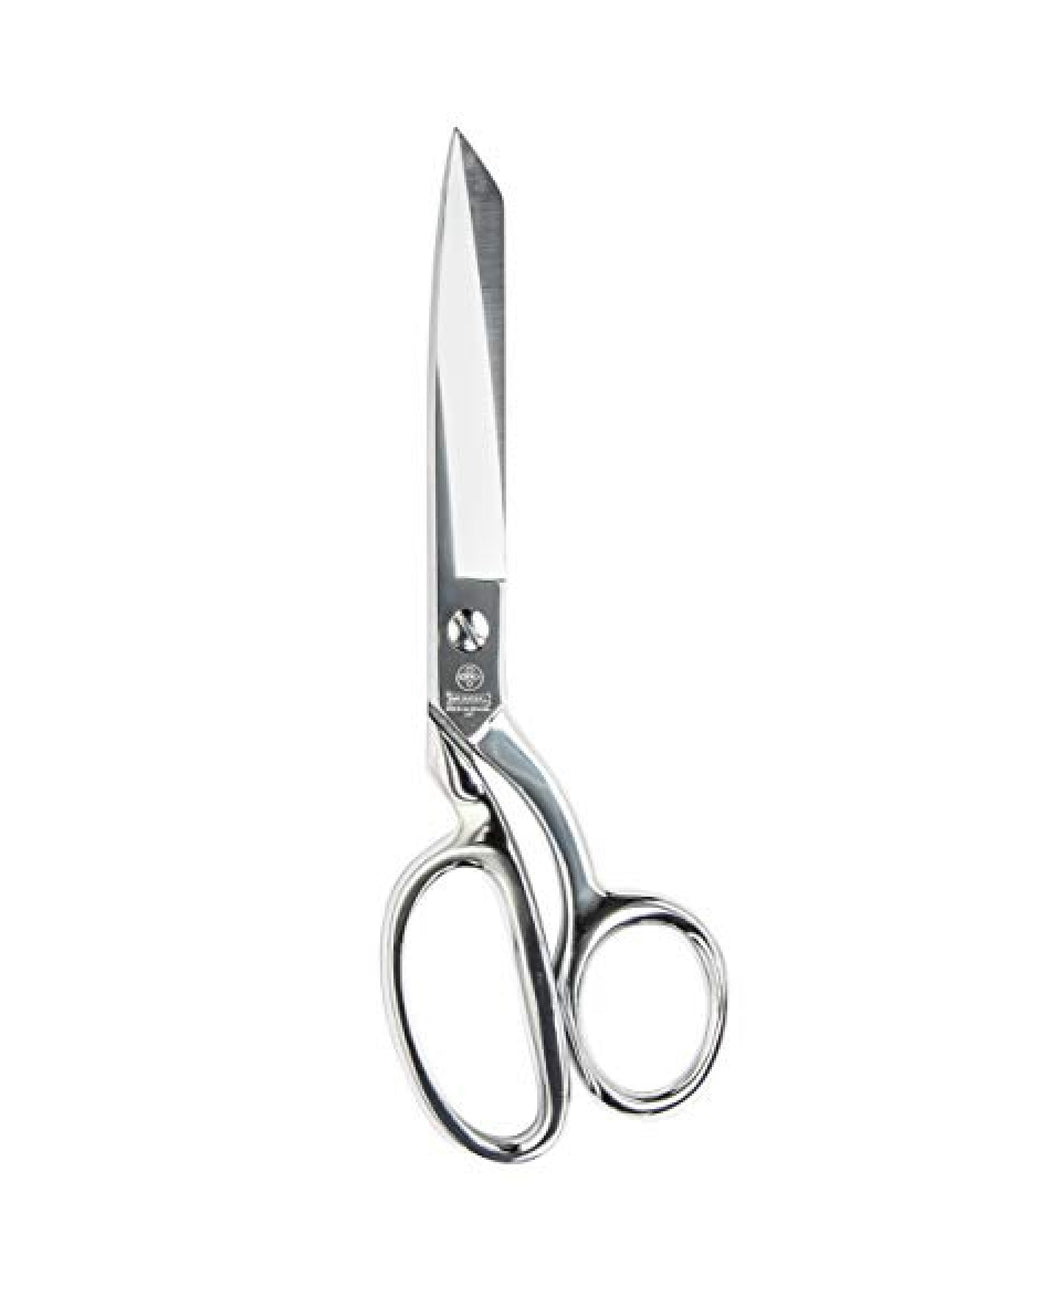 Classic Forged 8" Dressmaker Shears - Zipper and Thread